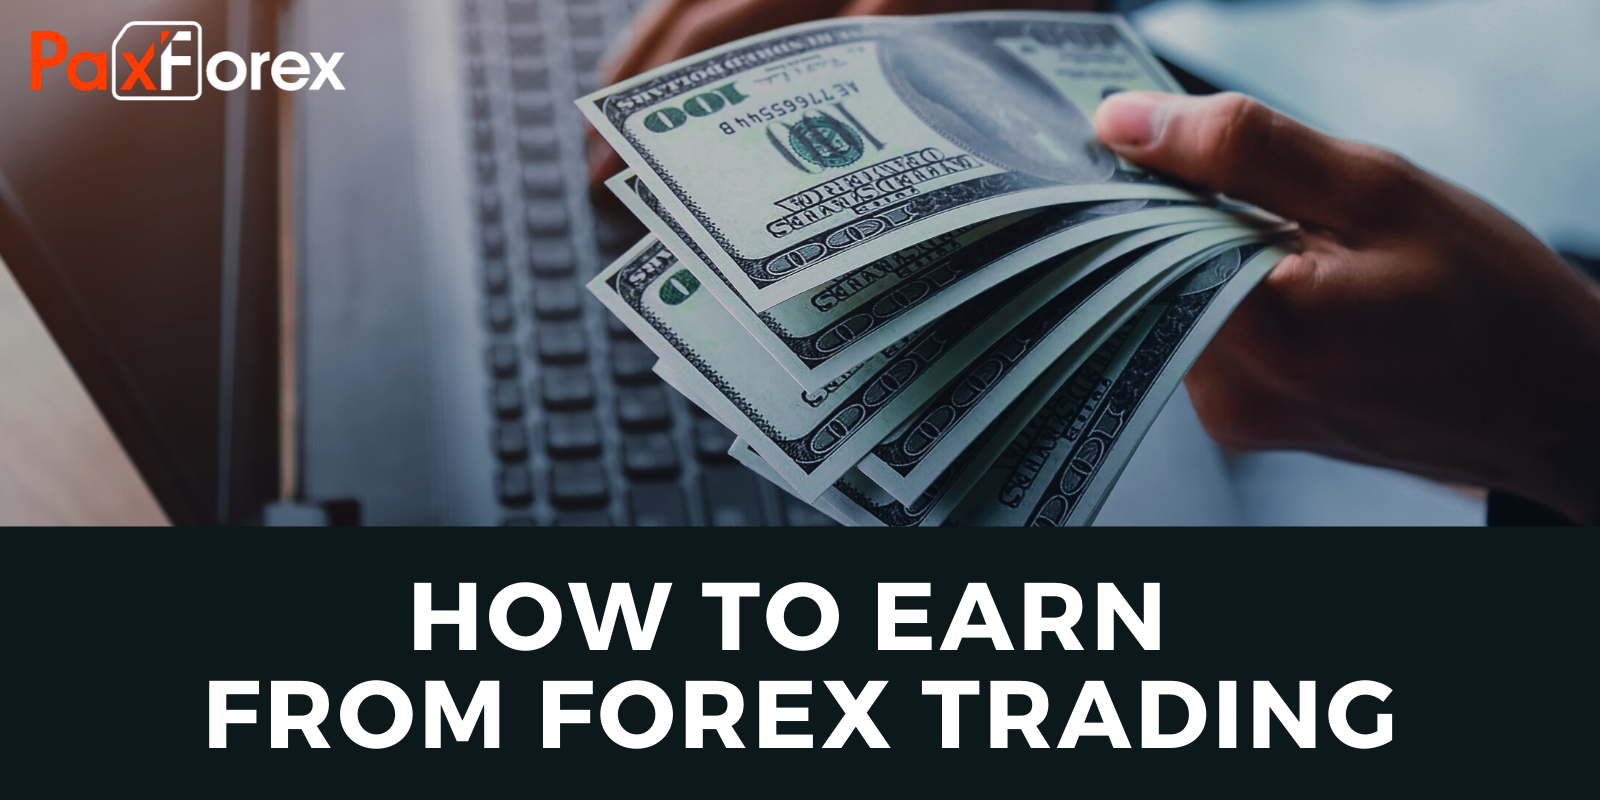 Ways to earn forex wikipedia forex pairs calculator